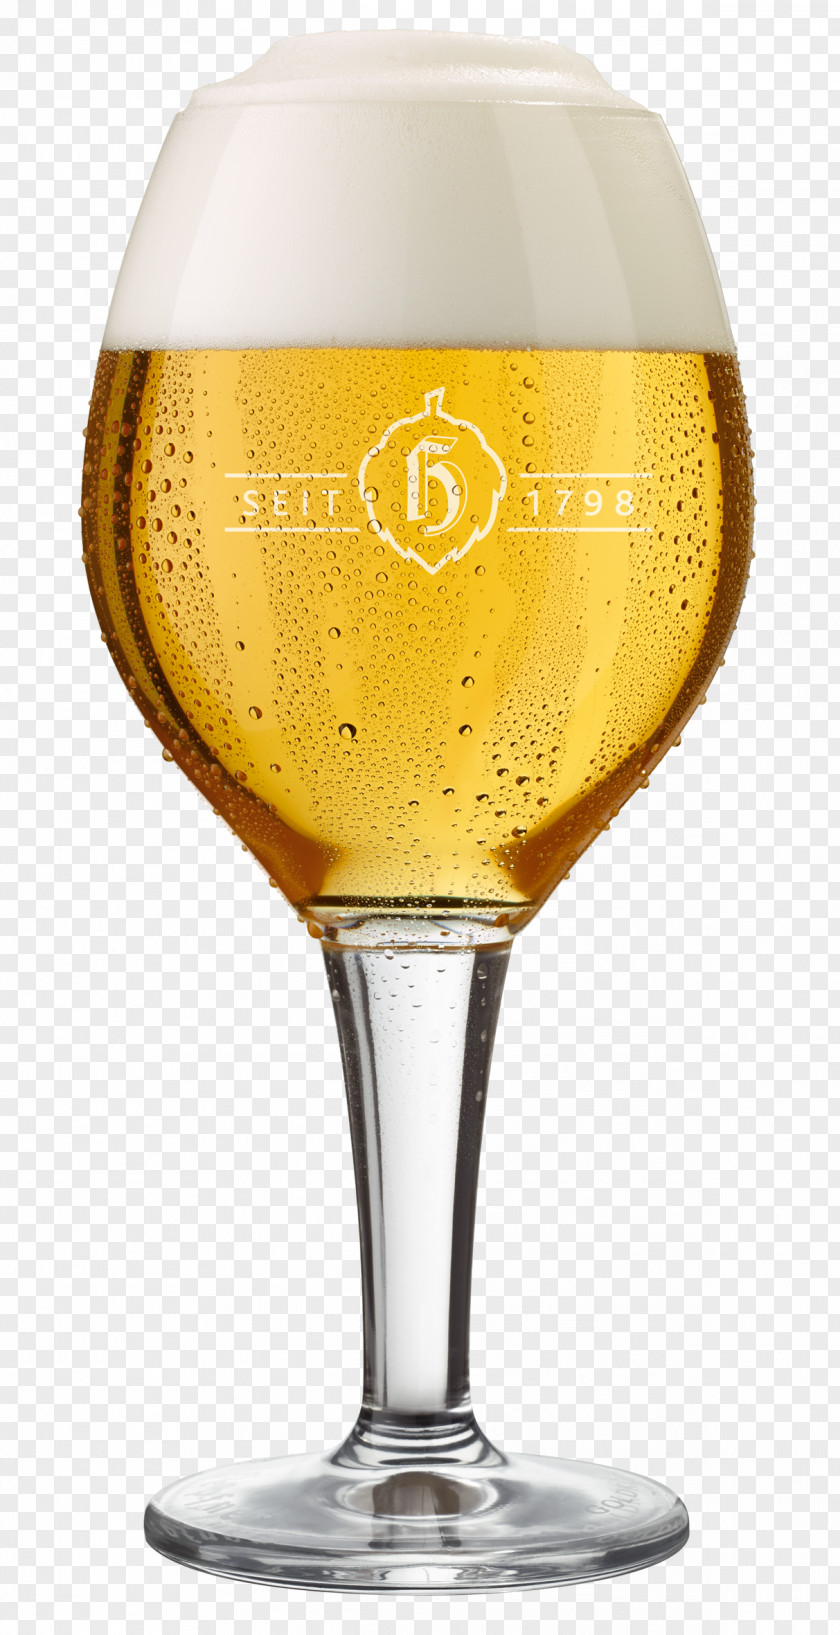 Marketing Materials Wine Glass Beer Imperial Pint Champagne PNG